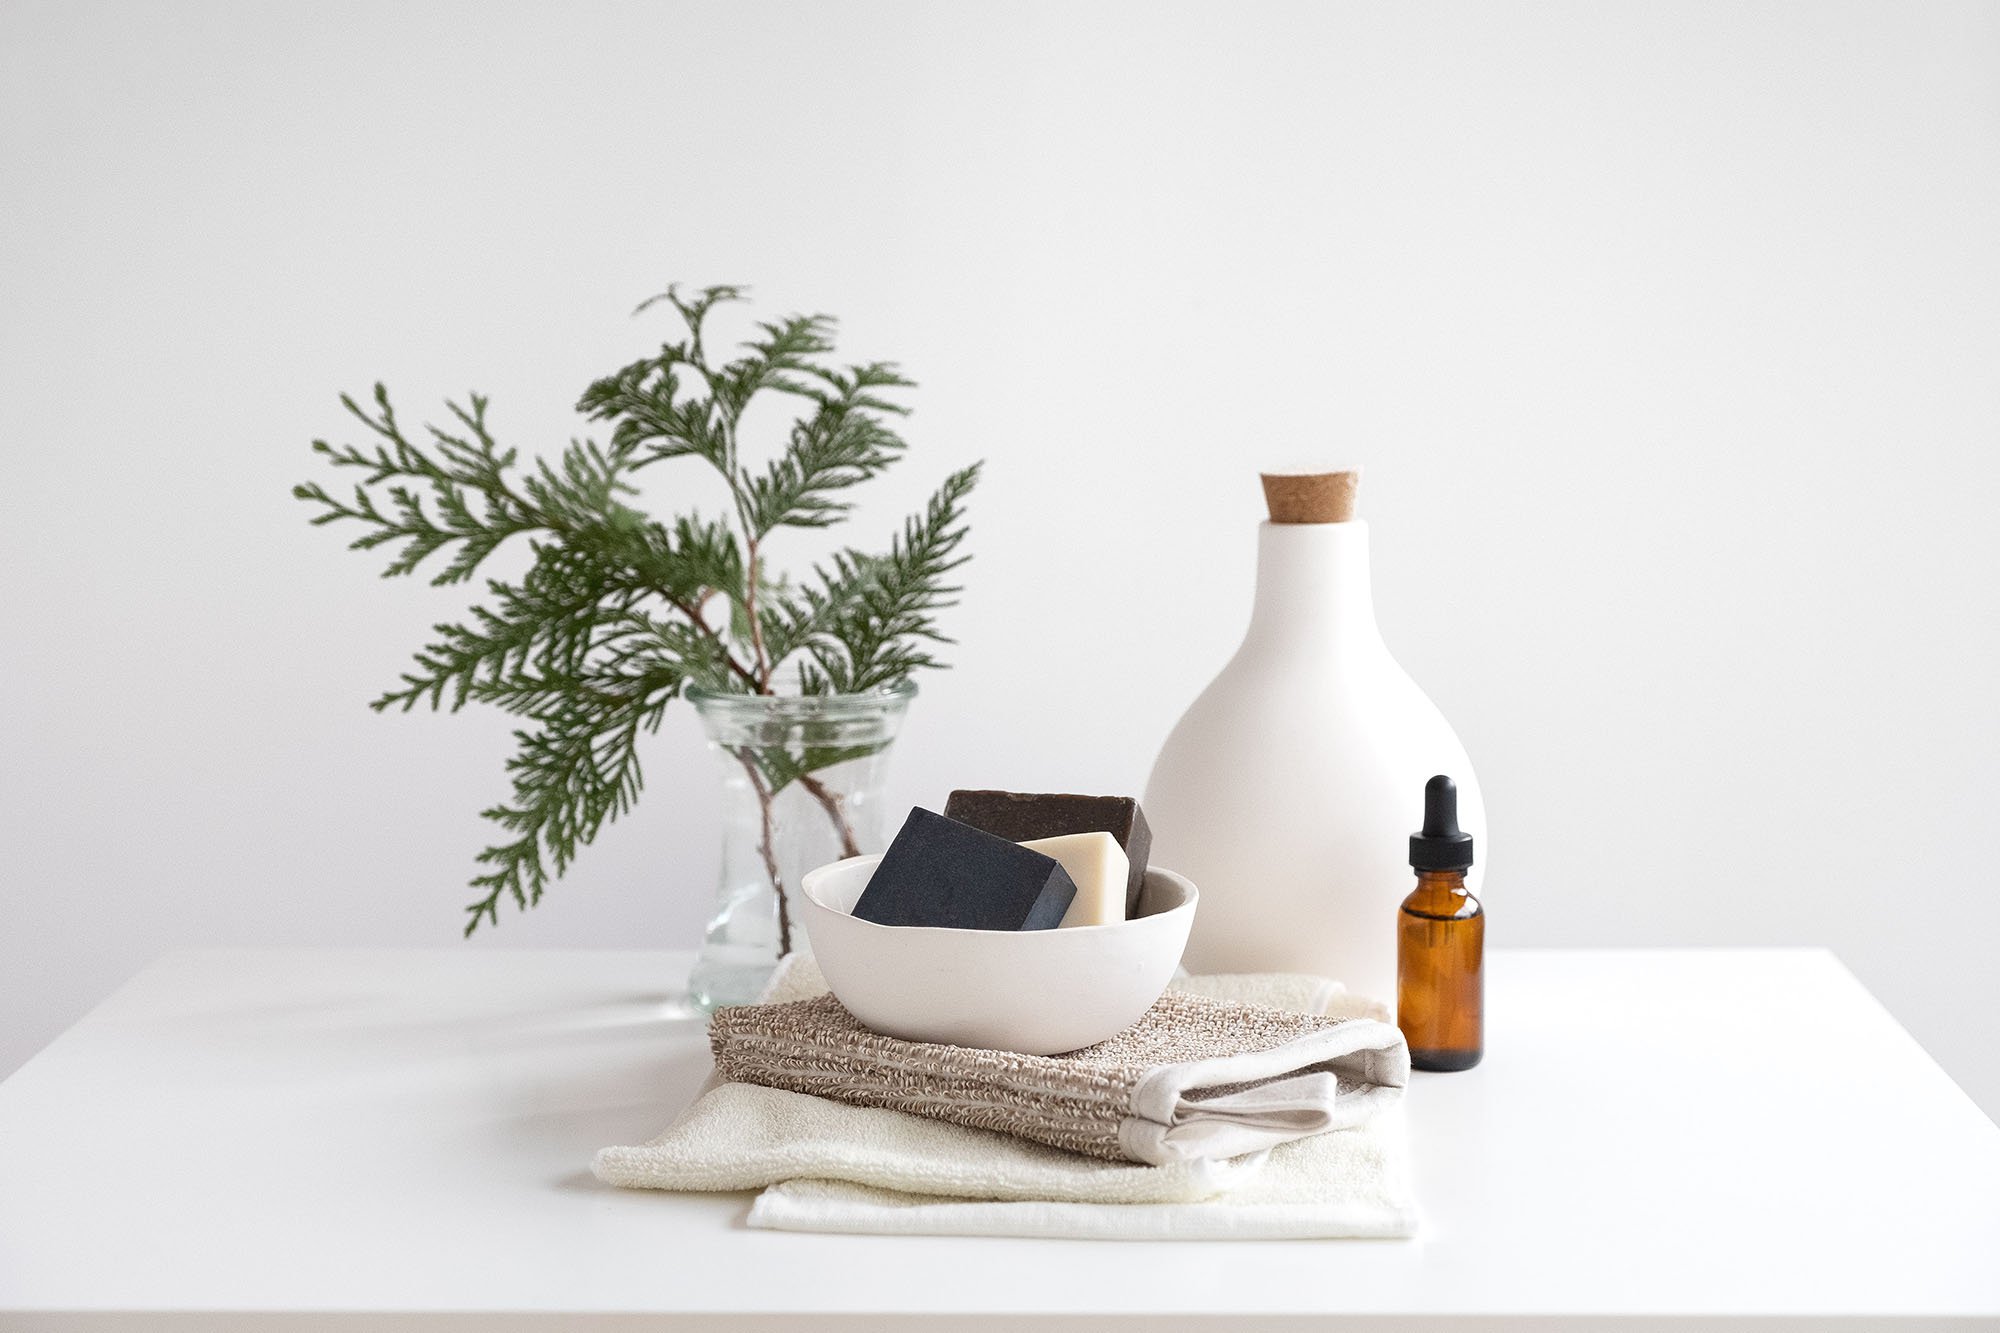 fern, towels, soaps, vase and oil dropper on white table